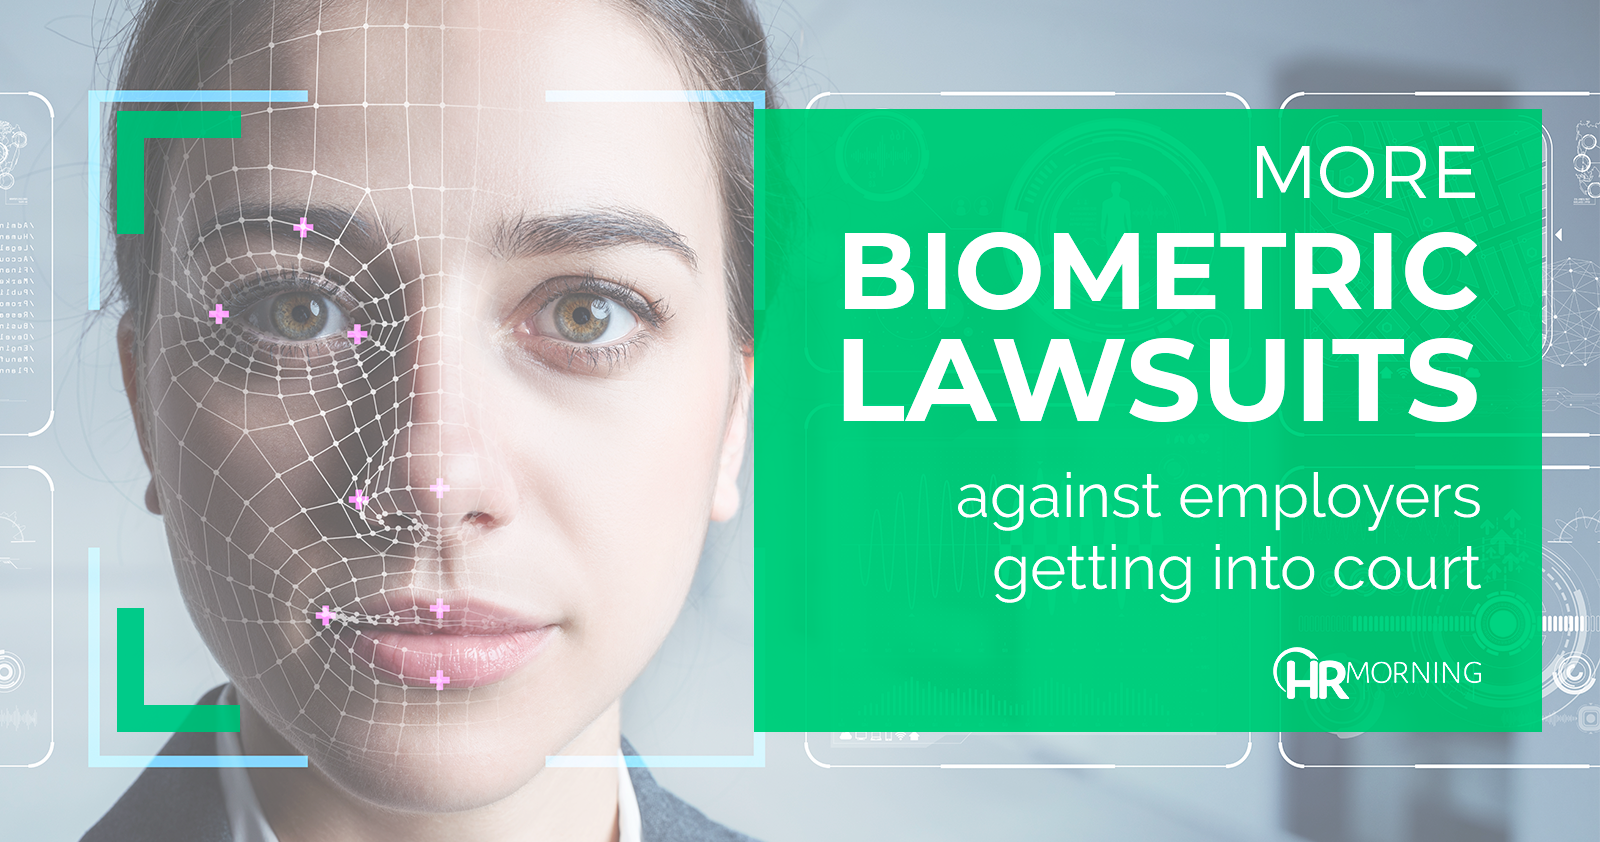 more biometric lawsuits against employers getting into court